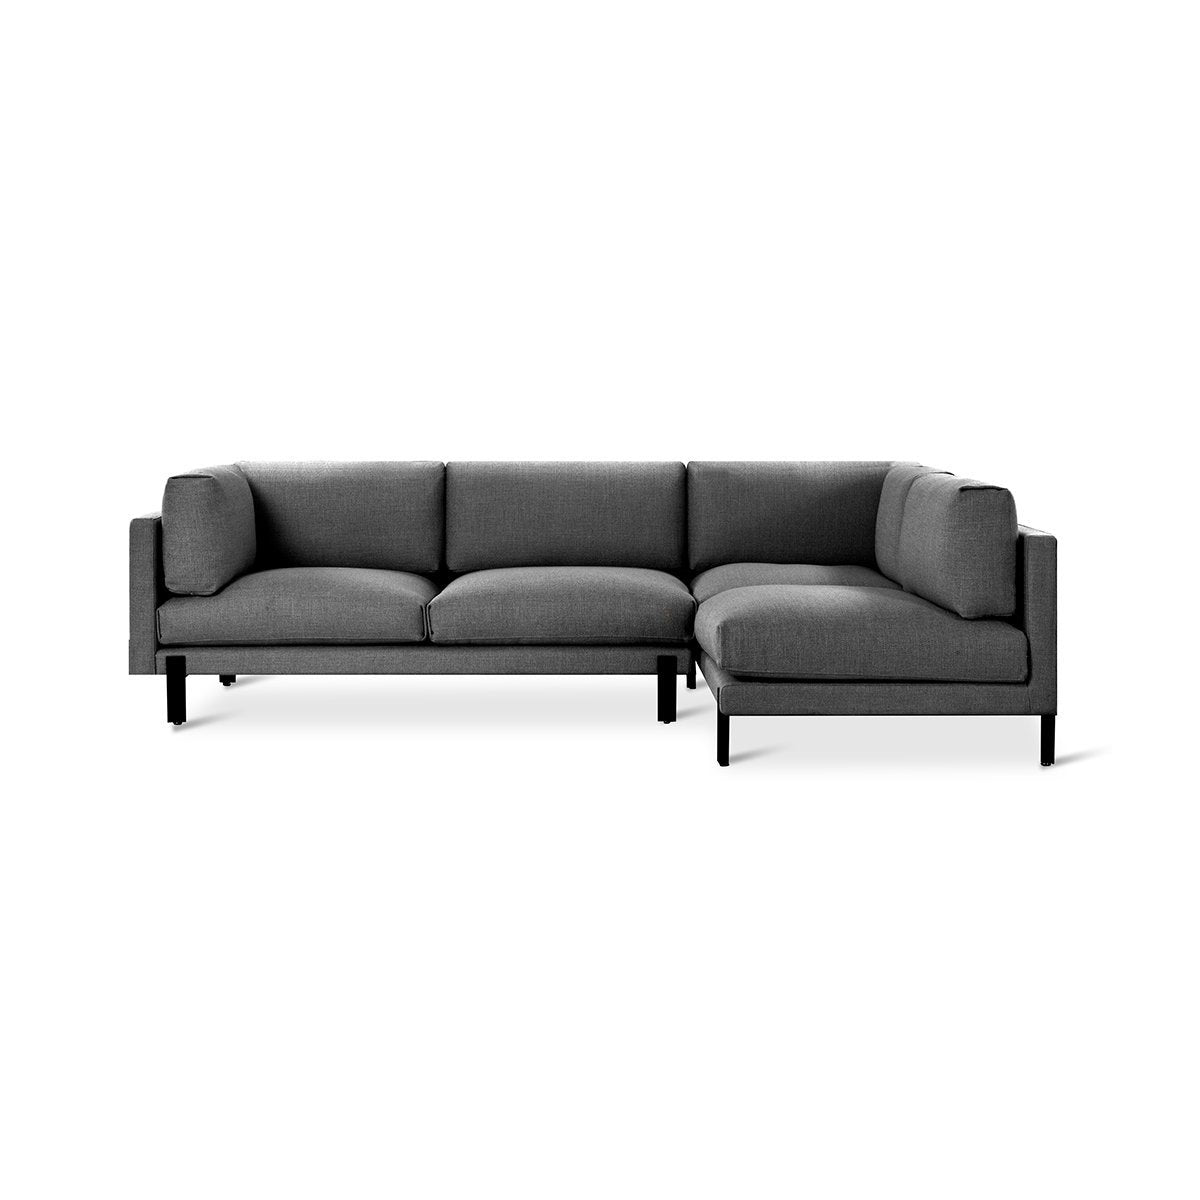 Load image into Gallery viewer, Silverlake Sectional Right Facing Andorra PewterSectional Sofa Gus*  Andorra Pewter   Four Hands, Burke Decor, Mid Century Modern Furniture, Old Bones Furniture Company, Old Bones Co, Modern Mid Century, Designer Furniture, https://www.oldbonesco.com/
